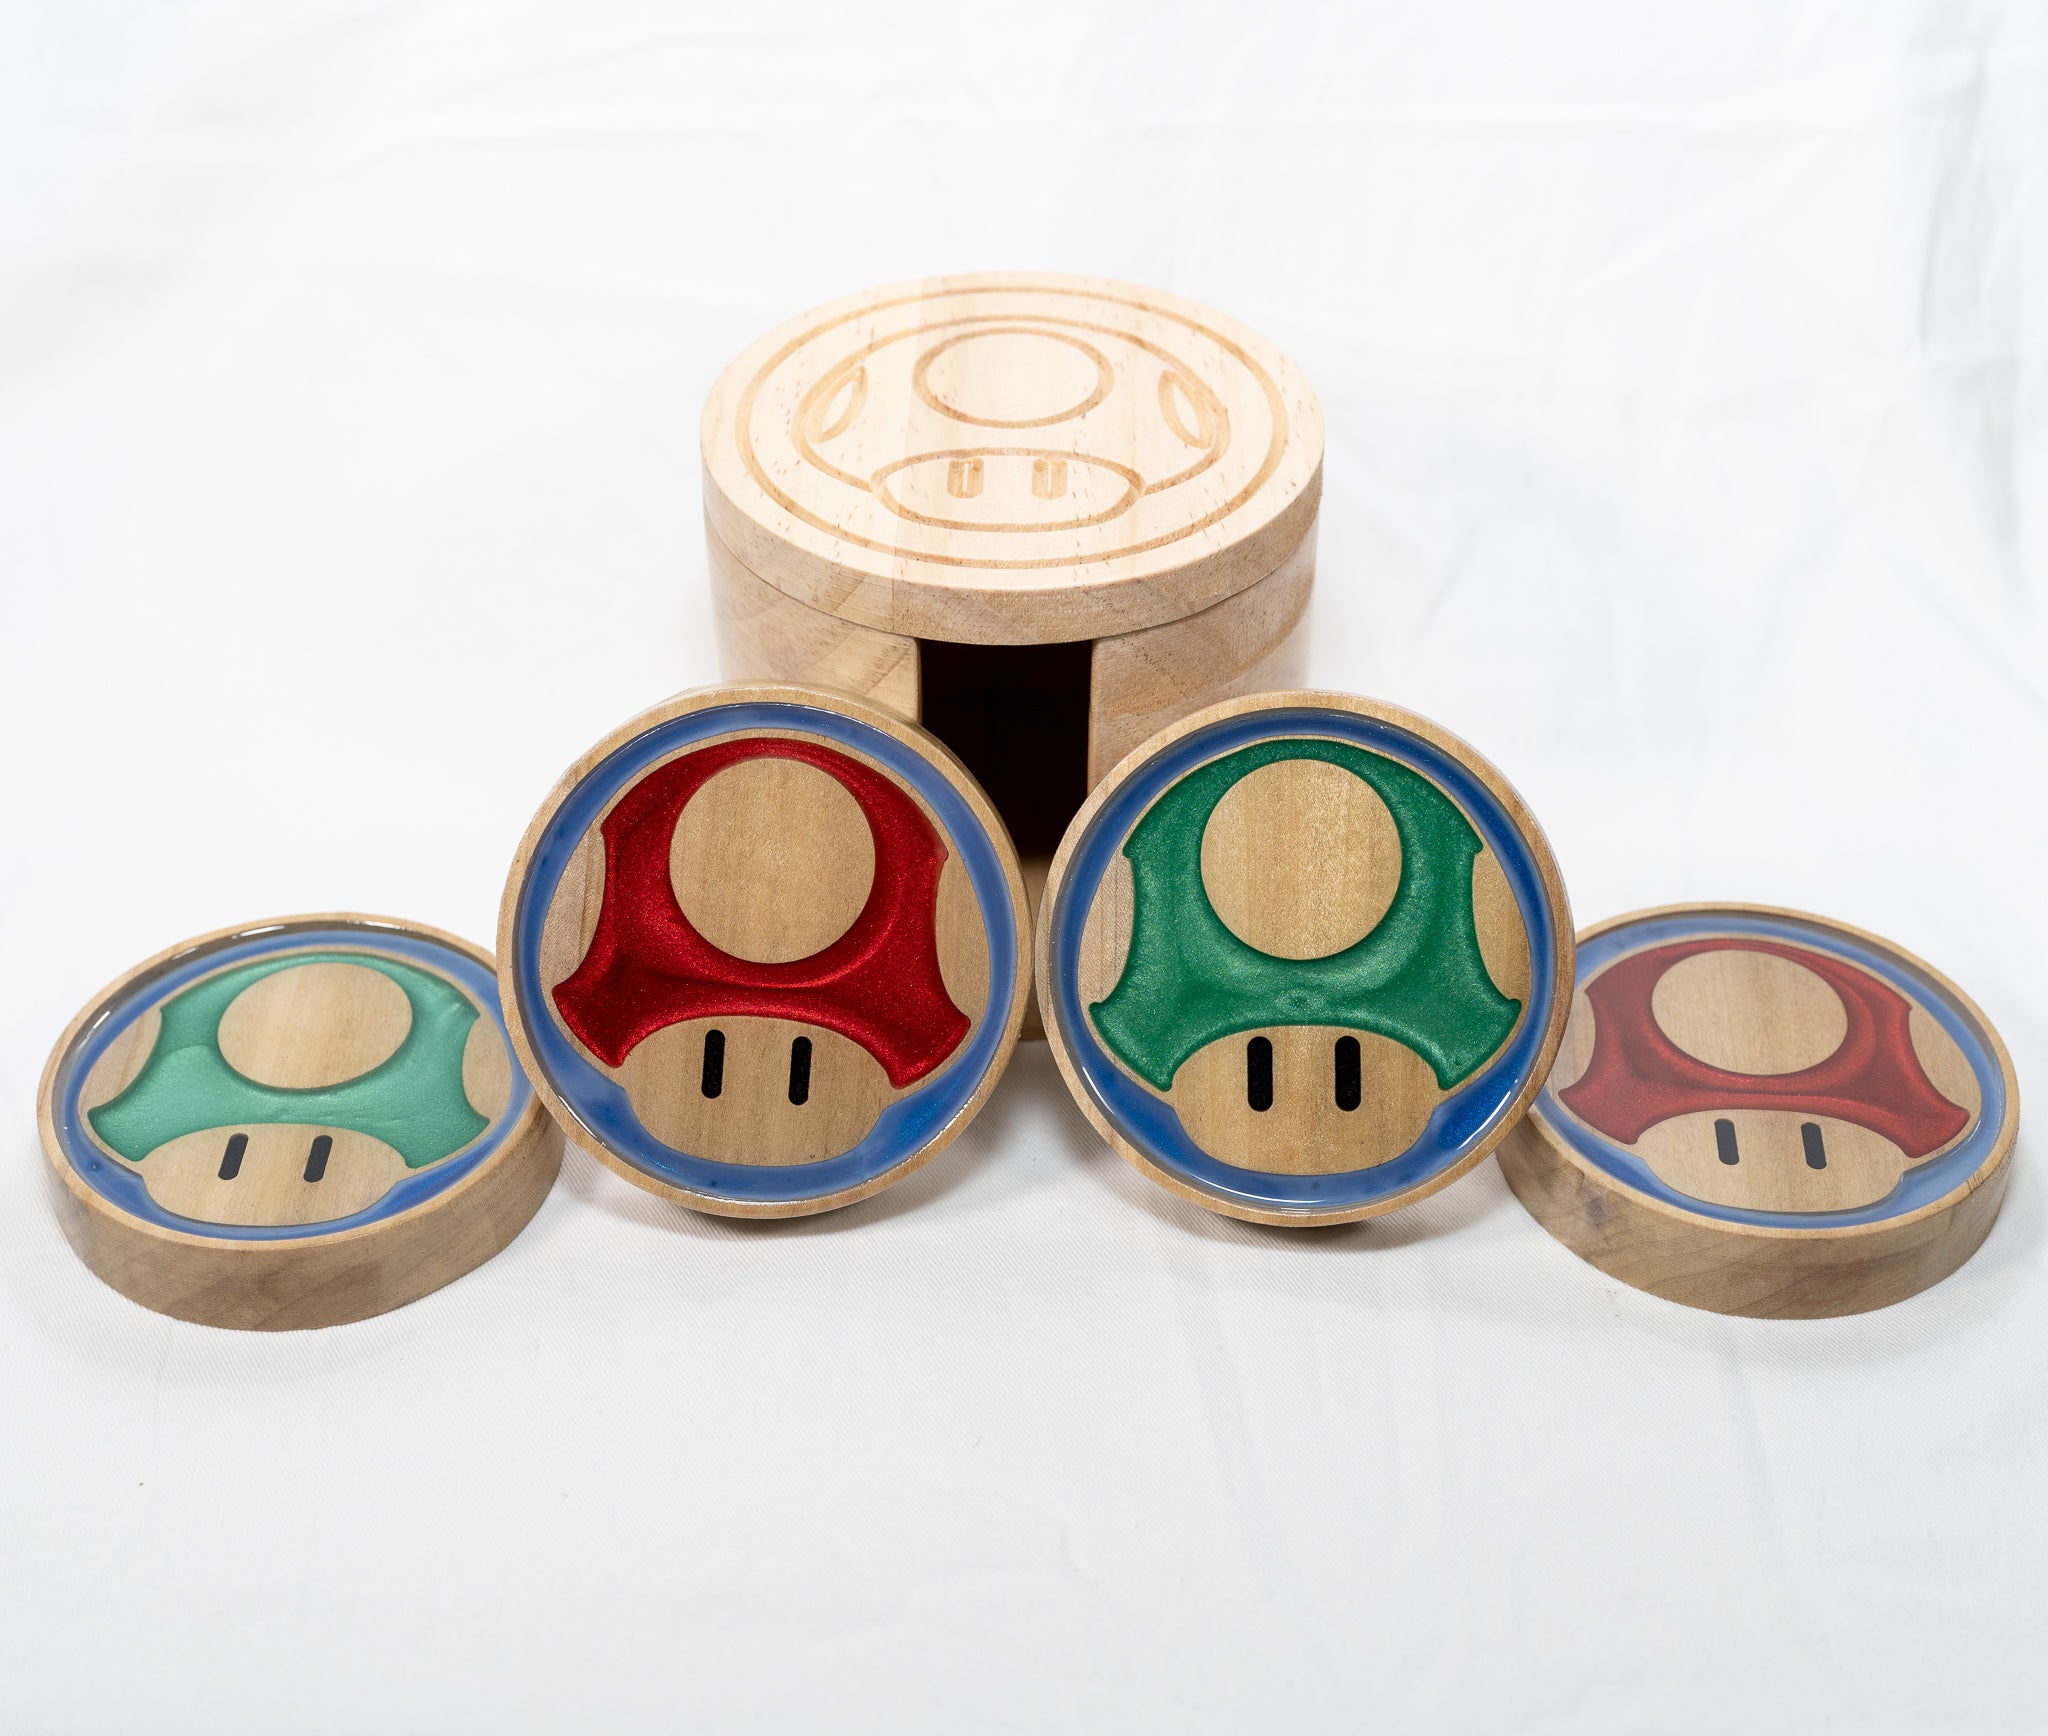 A set of poplar wood green and red mushroom coasters from the mario video game